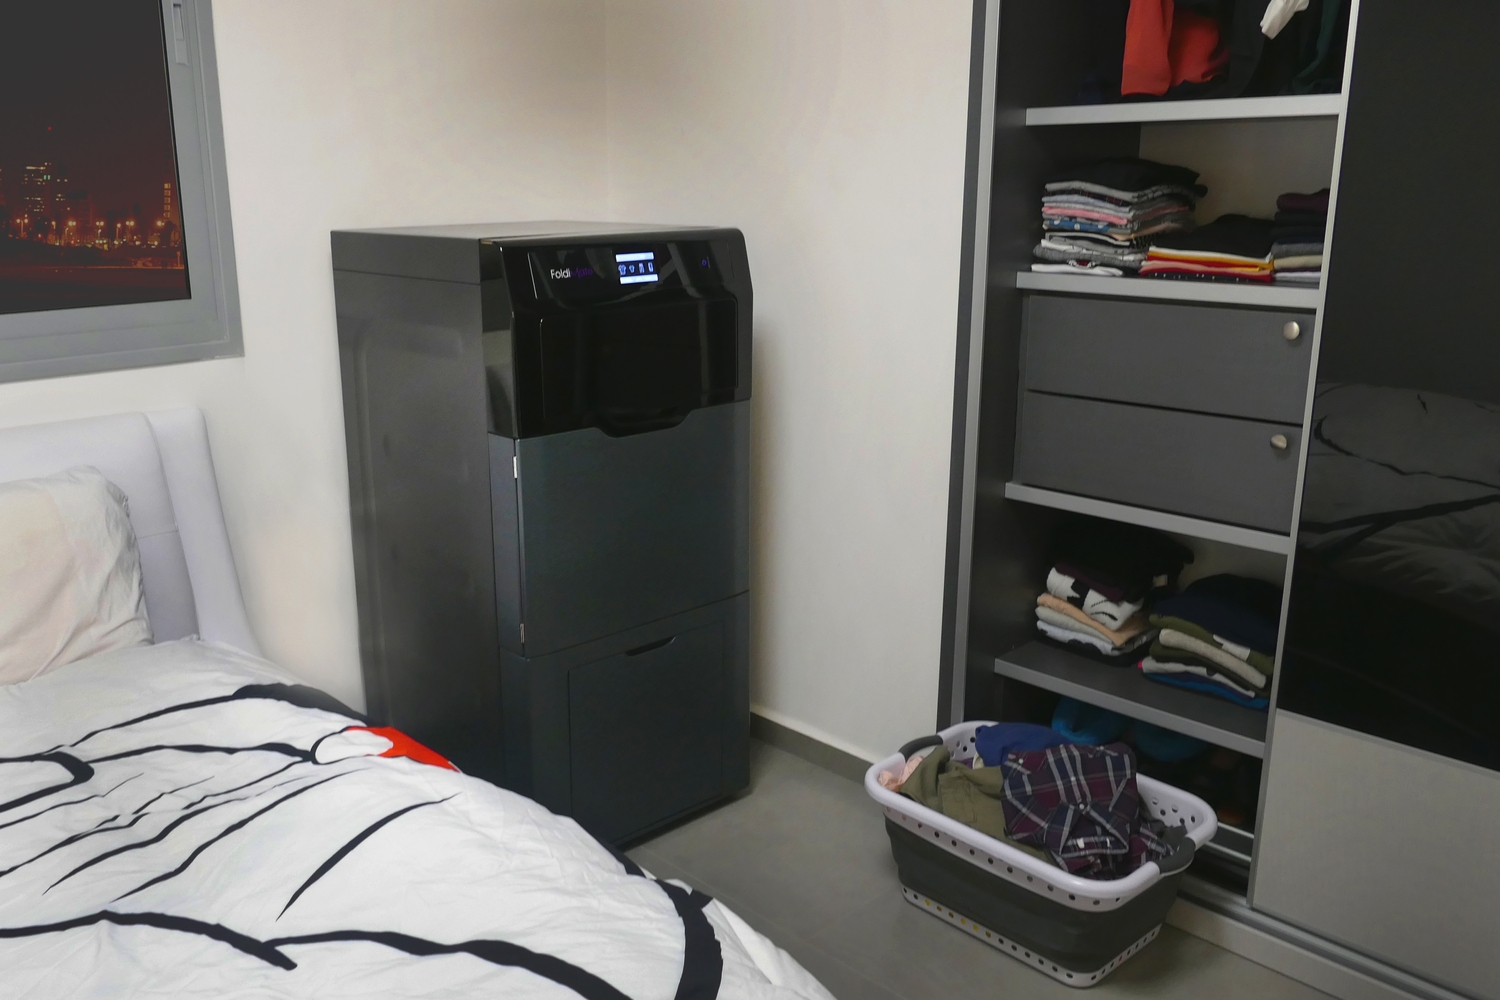 CES 2019: Foldimate's Laundry-Folding Machine Is Cool, But Is it Necessary?